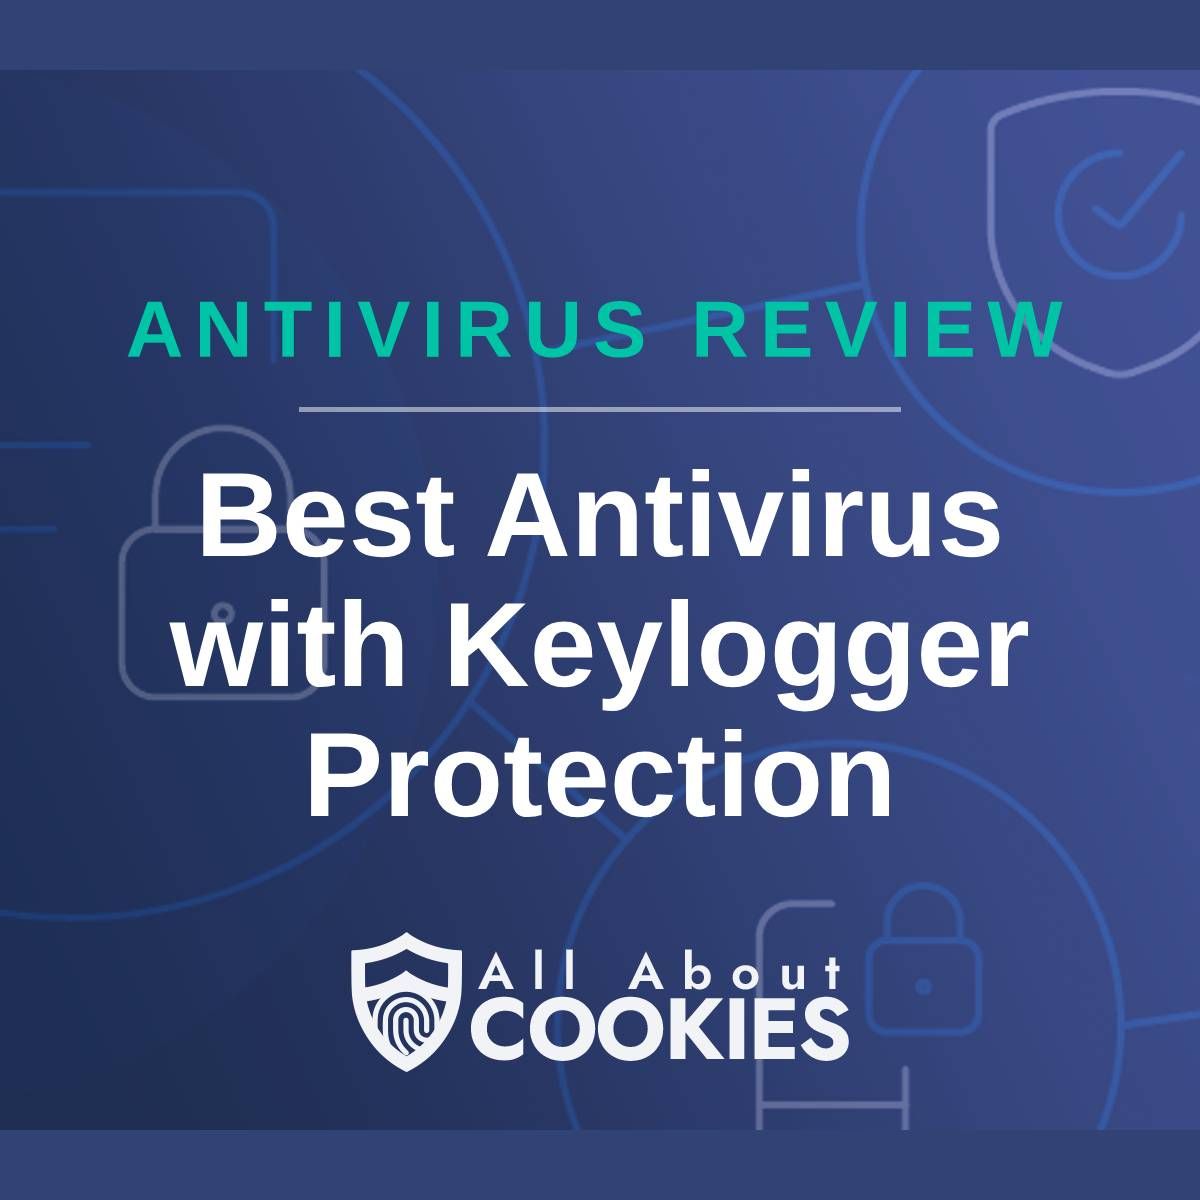 A blue background with images of locks and shields and the text &quot;Best Antivirus with Keylogger Protection&quot;